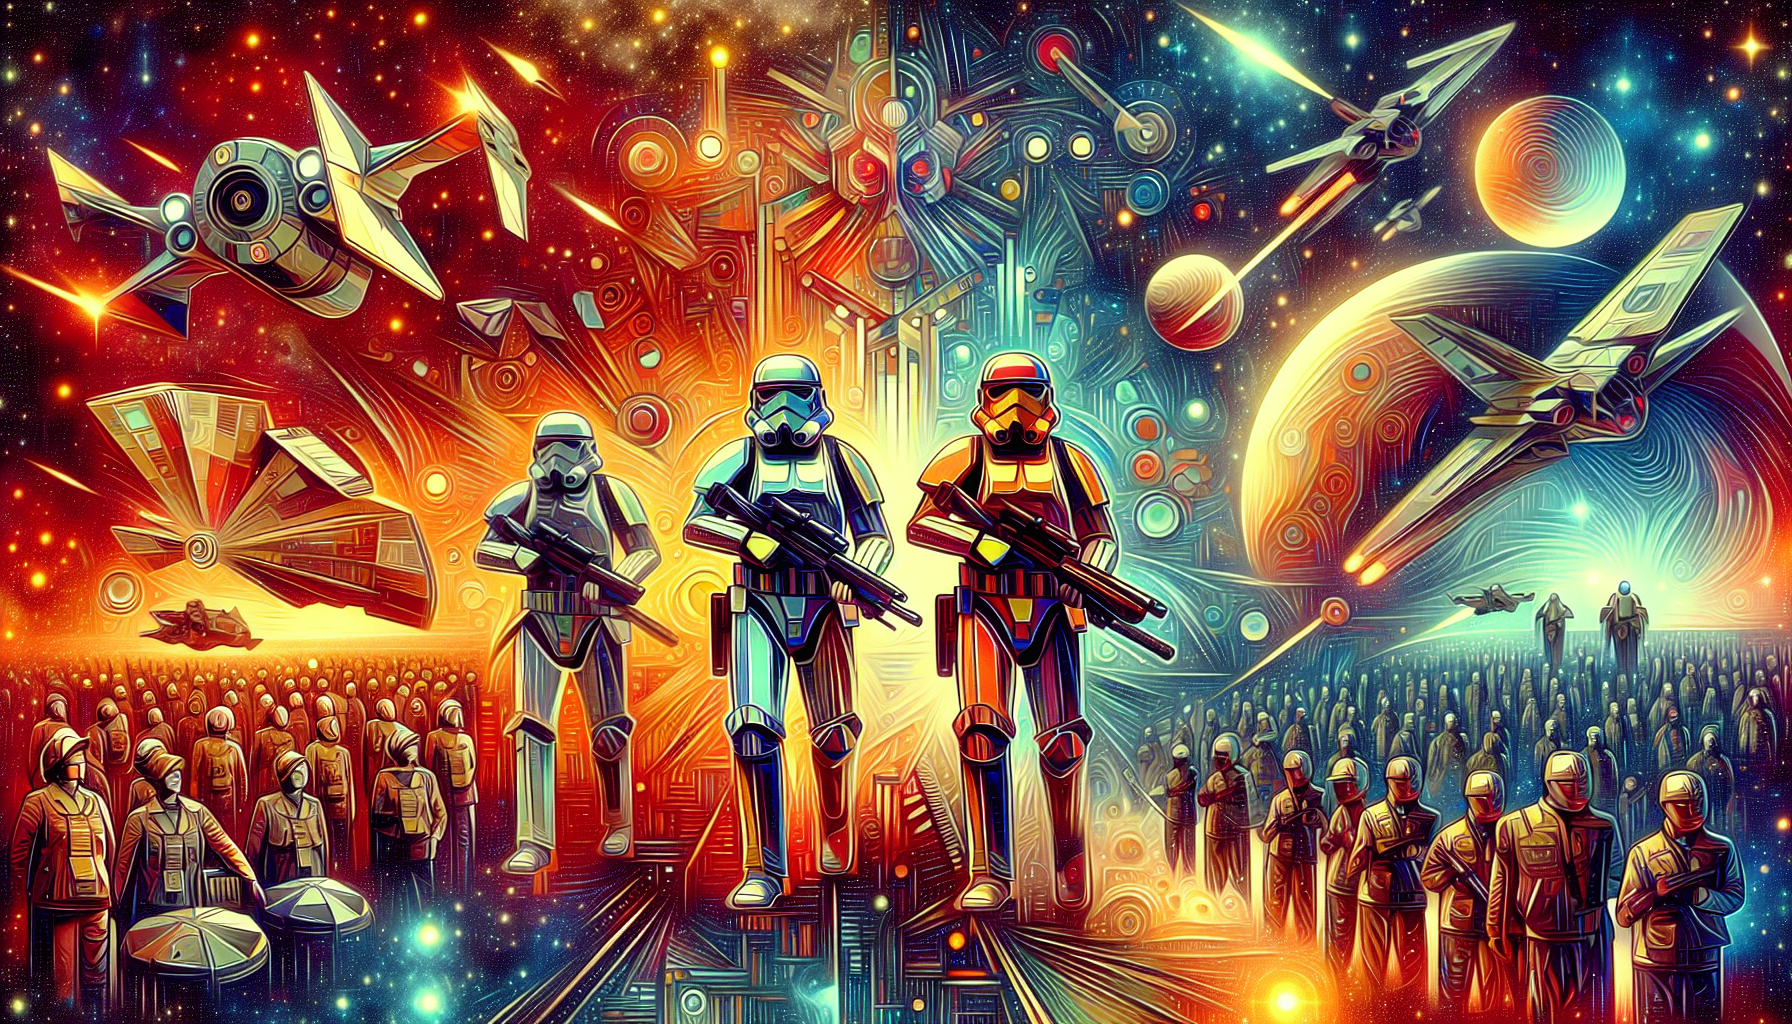 Create an illustration that encompasses the influence of identical soldiers in a space-themed universe, reminiscent of a popular cinematic universe if seen through the lens of symbolic interpretation. The image should possess a vibrant array of colors to capture the sci-fi ambiance perfectly. Pay special attention to key elements of a technologically advanced universe, such as futuristic armors, space battleships, and extraterrestrial landscapes.